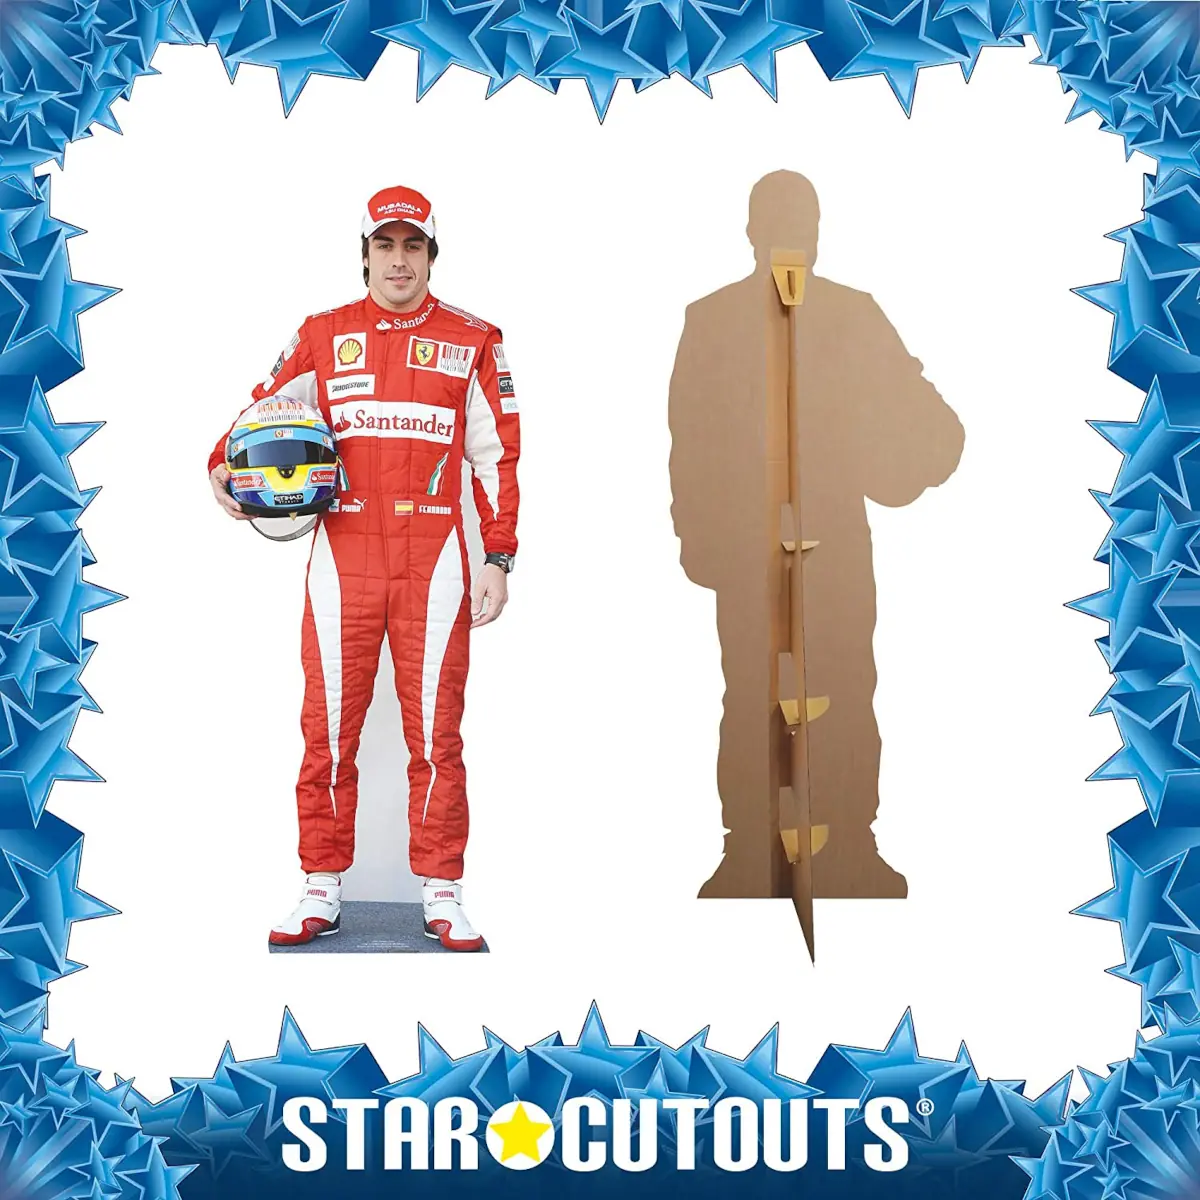 Fernando Alonso (Spanish Racing Driver) Lifesize Cardboard Cutout / Standee  - Cutouts & Collectables